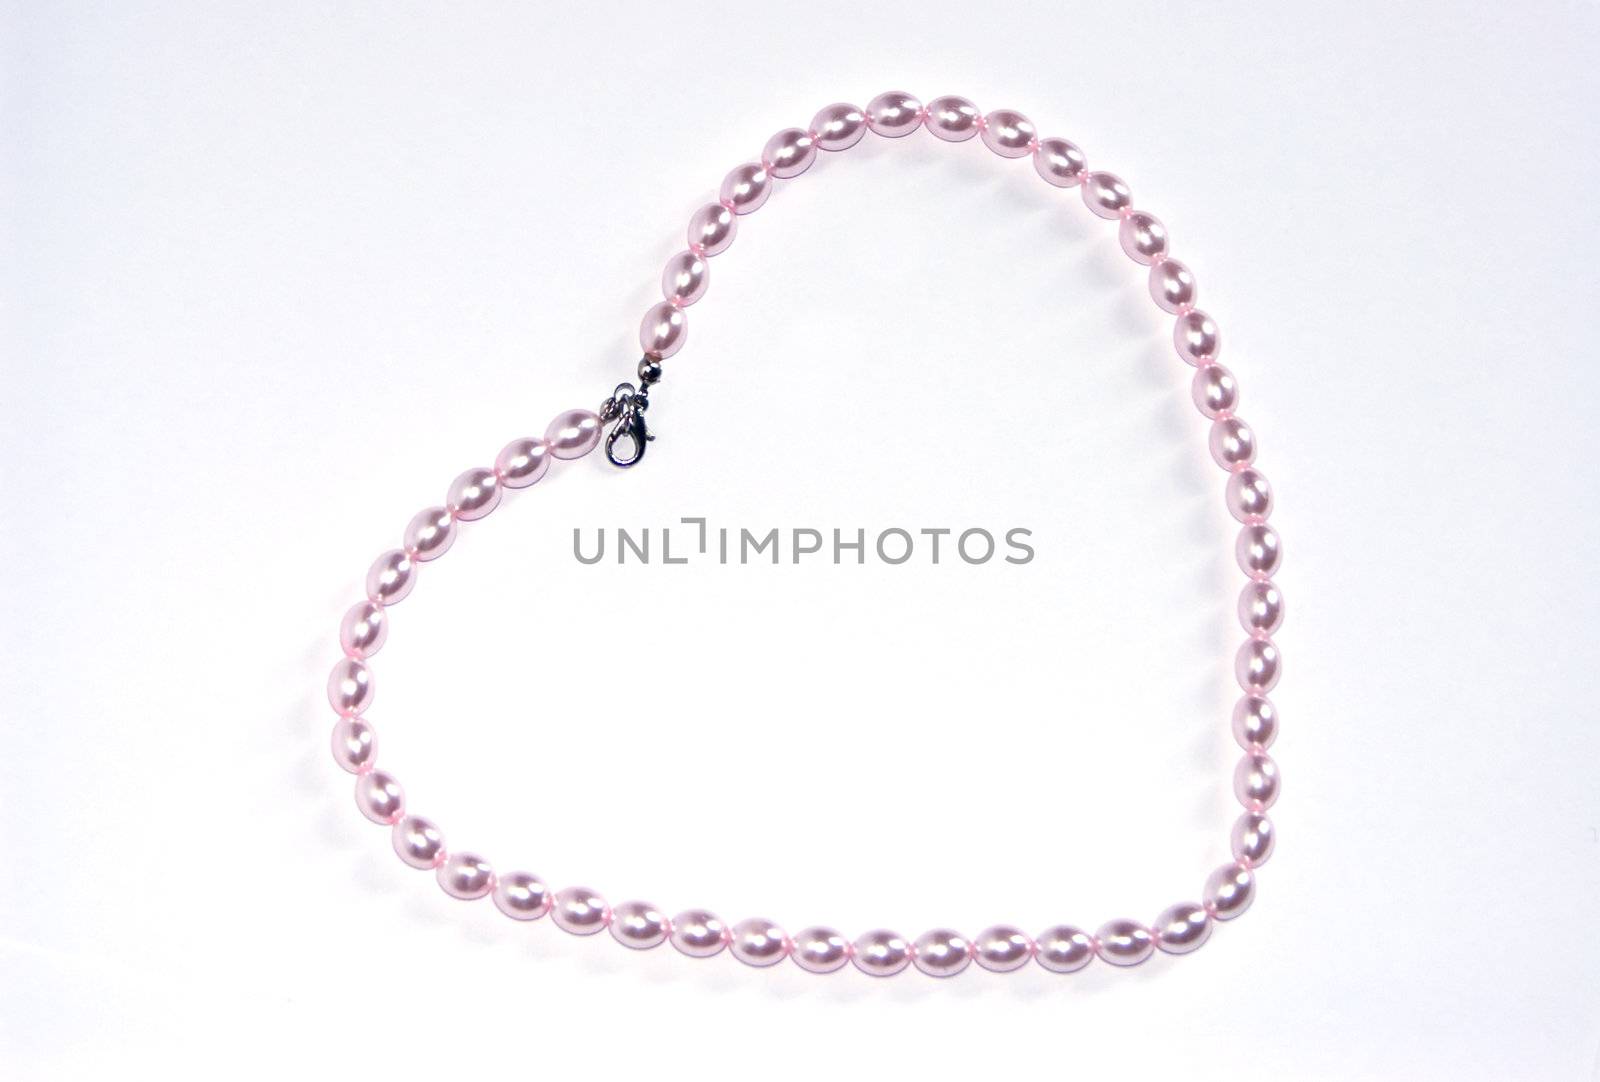 The image of the pearl beads combined in the form of heart